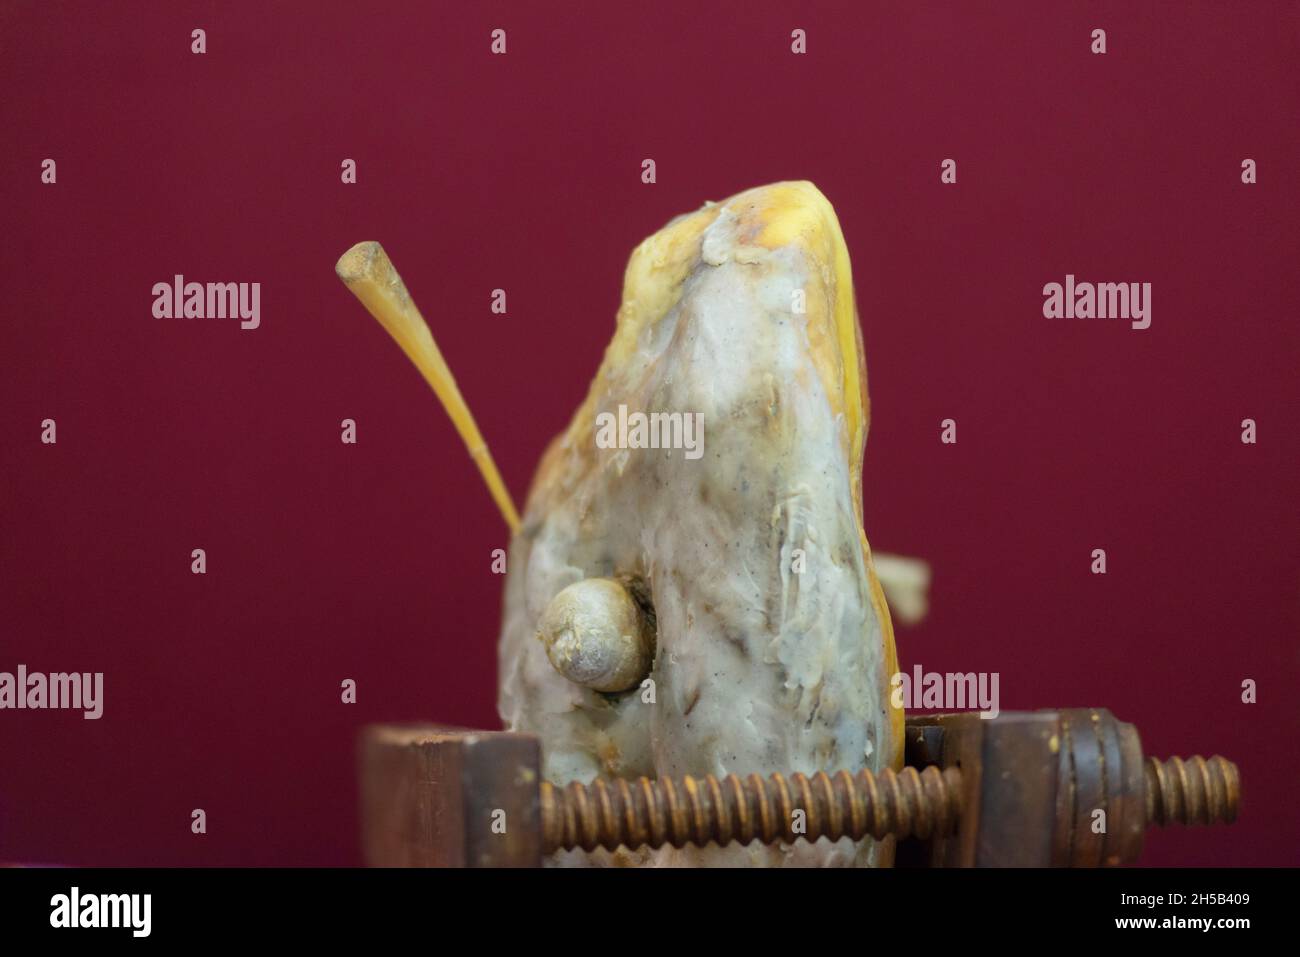 Whole Leg of Parma Ham in Wooden Support, Fibula the horse Bone Used for the Probing of Cured Meats Stock Photo